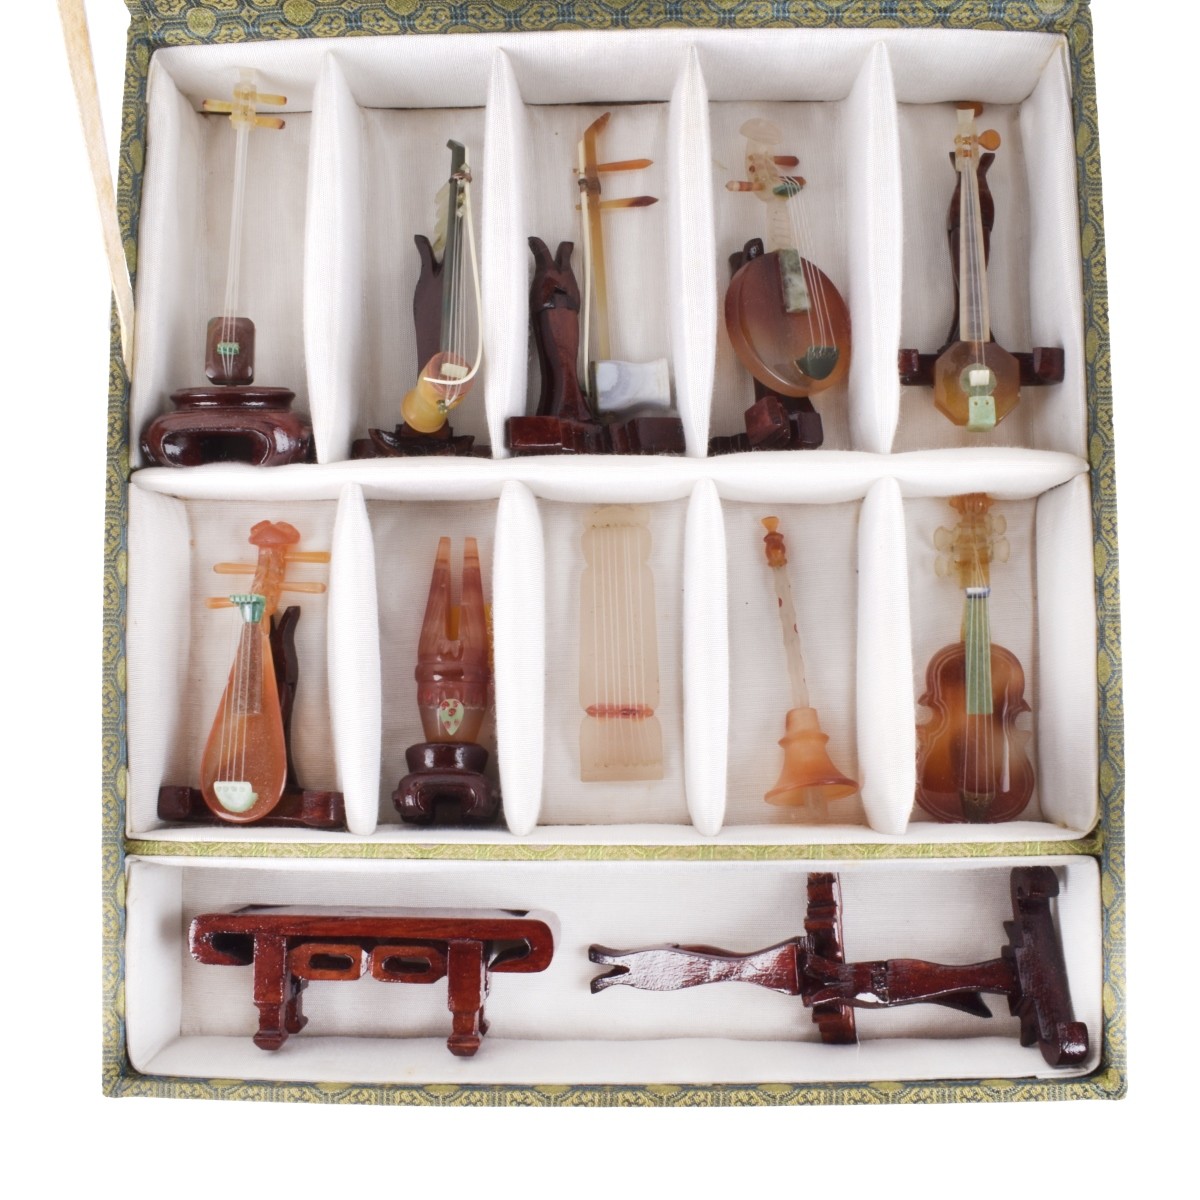 Ten (10) Chinese Musical instruments